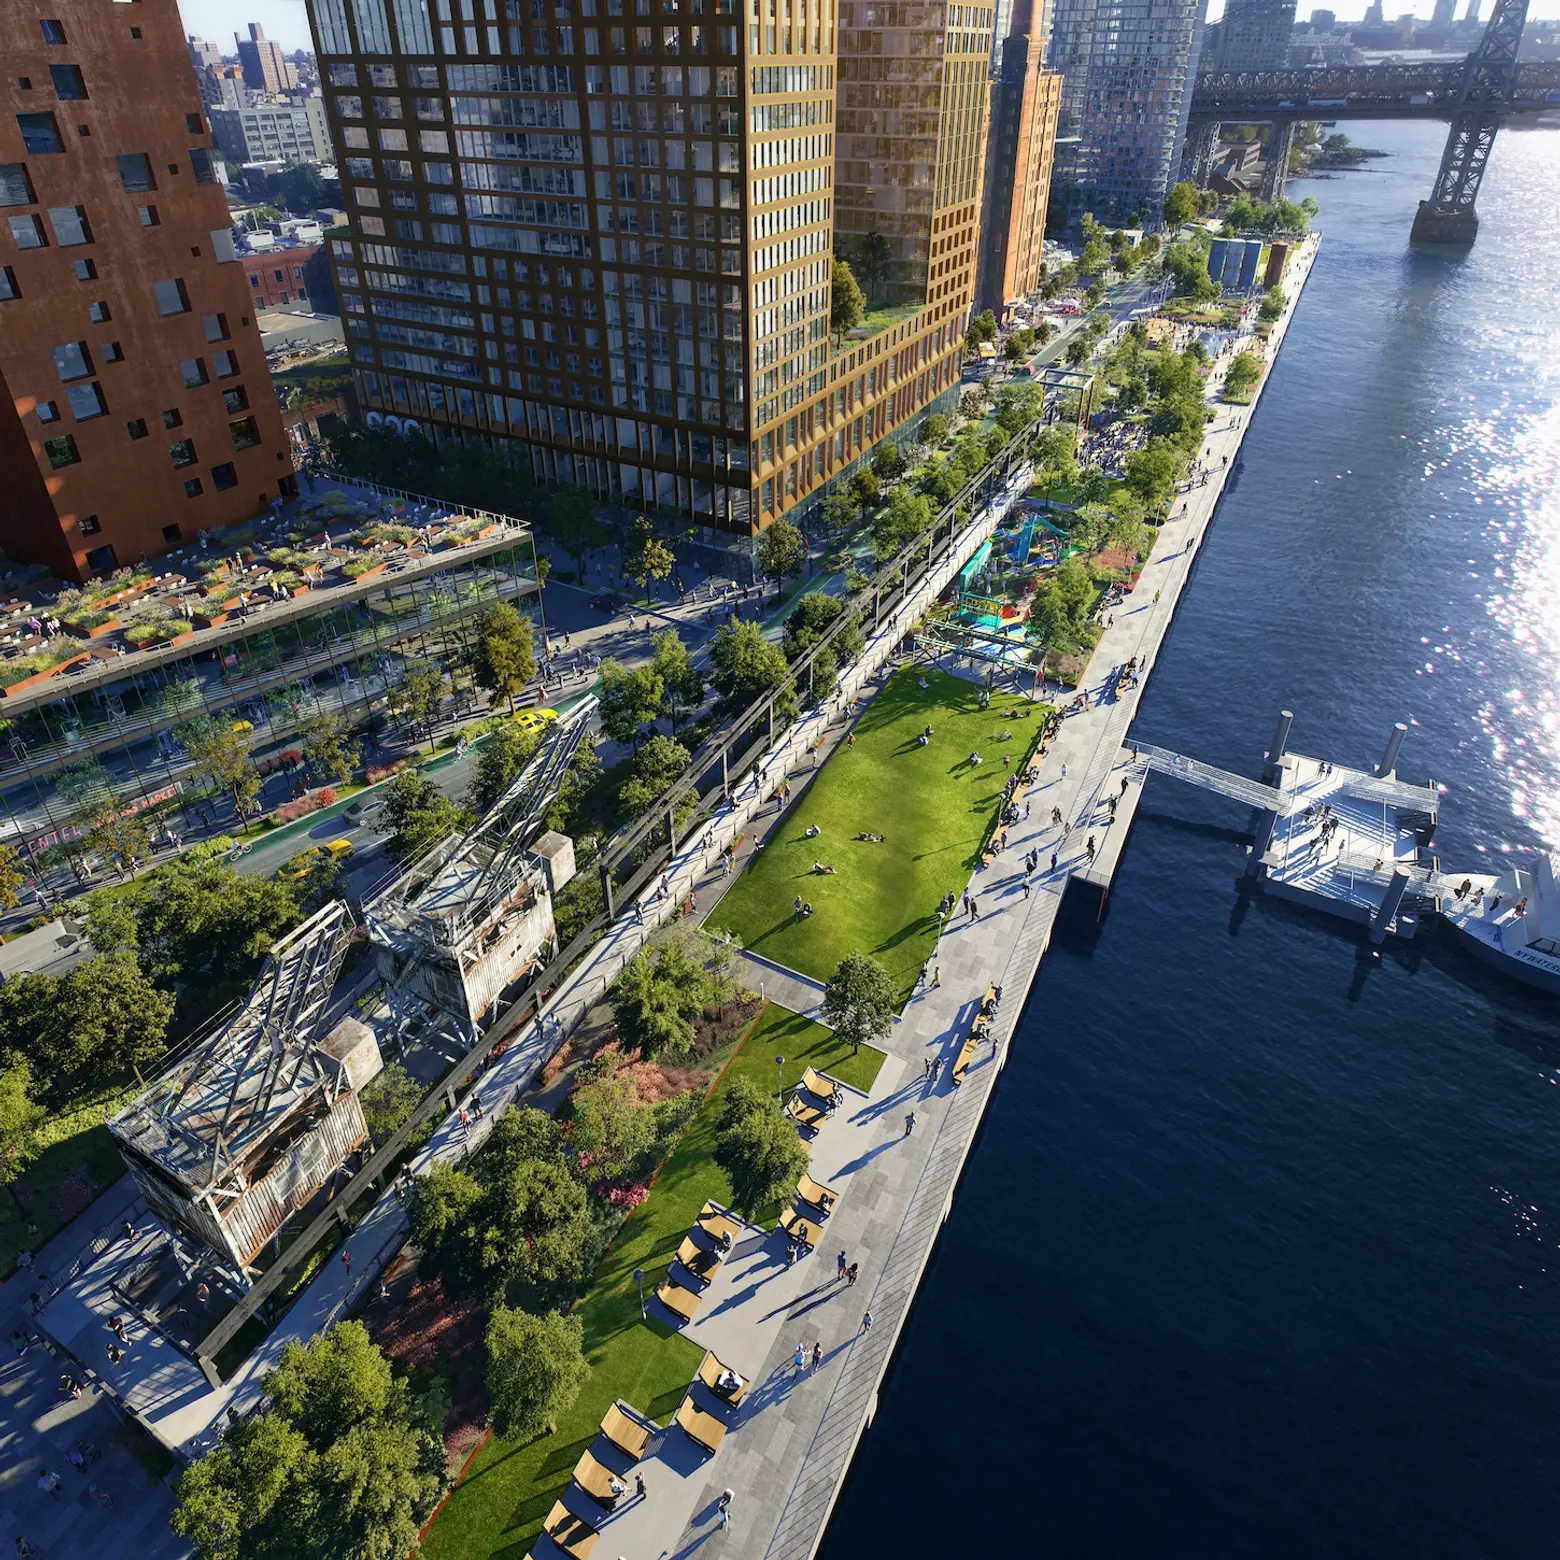 Domino Park, Domino Sugar Factory, Two Trees Management, James Corner Field Operations